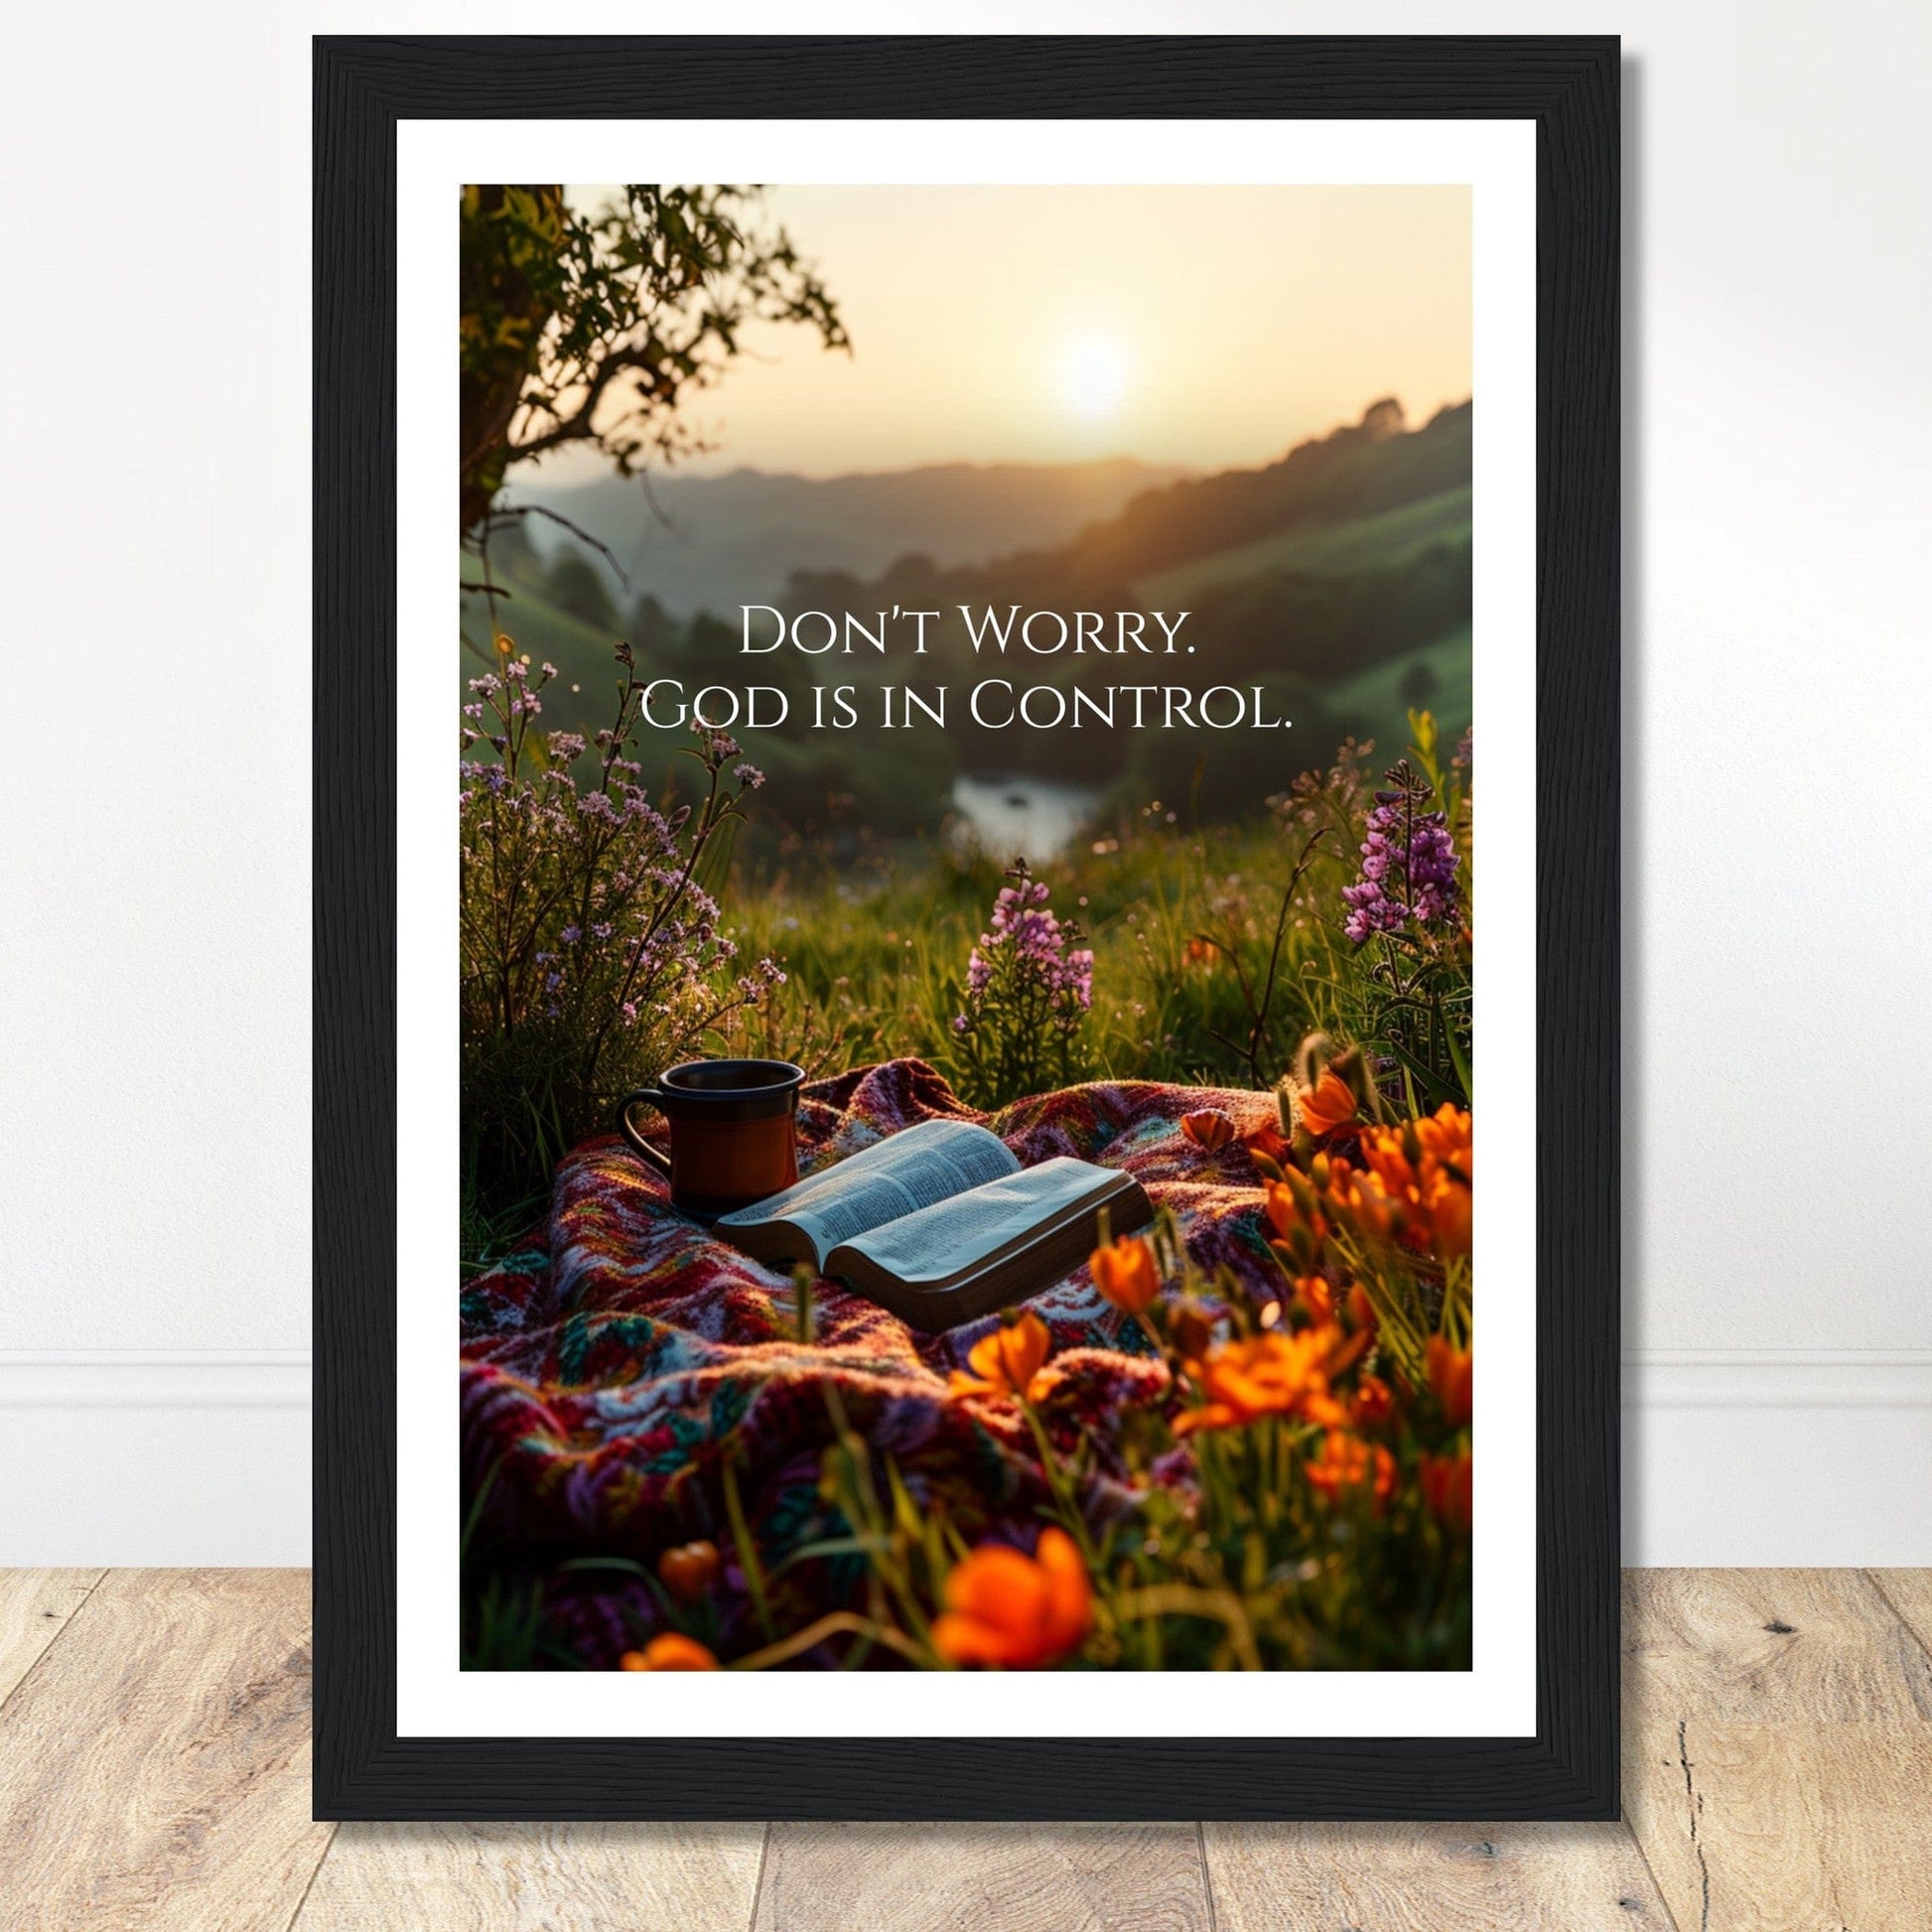 Coffee With My Father Print Material A4 21x29.7 cm / 8x12″ / Black frame Premium Matte Paper Wooden Framed Poster